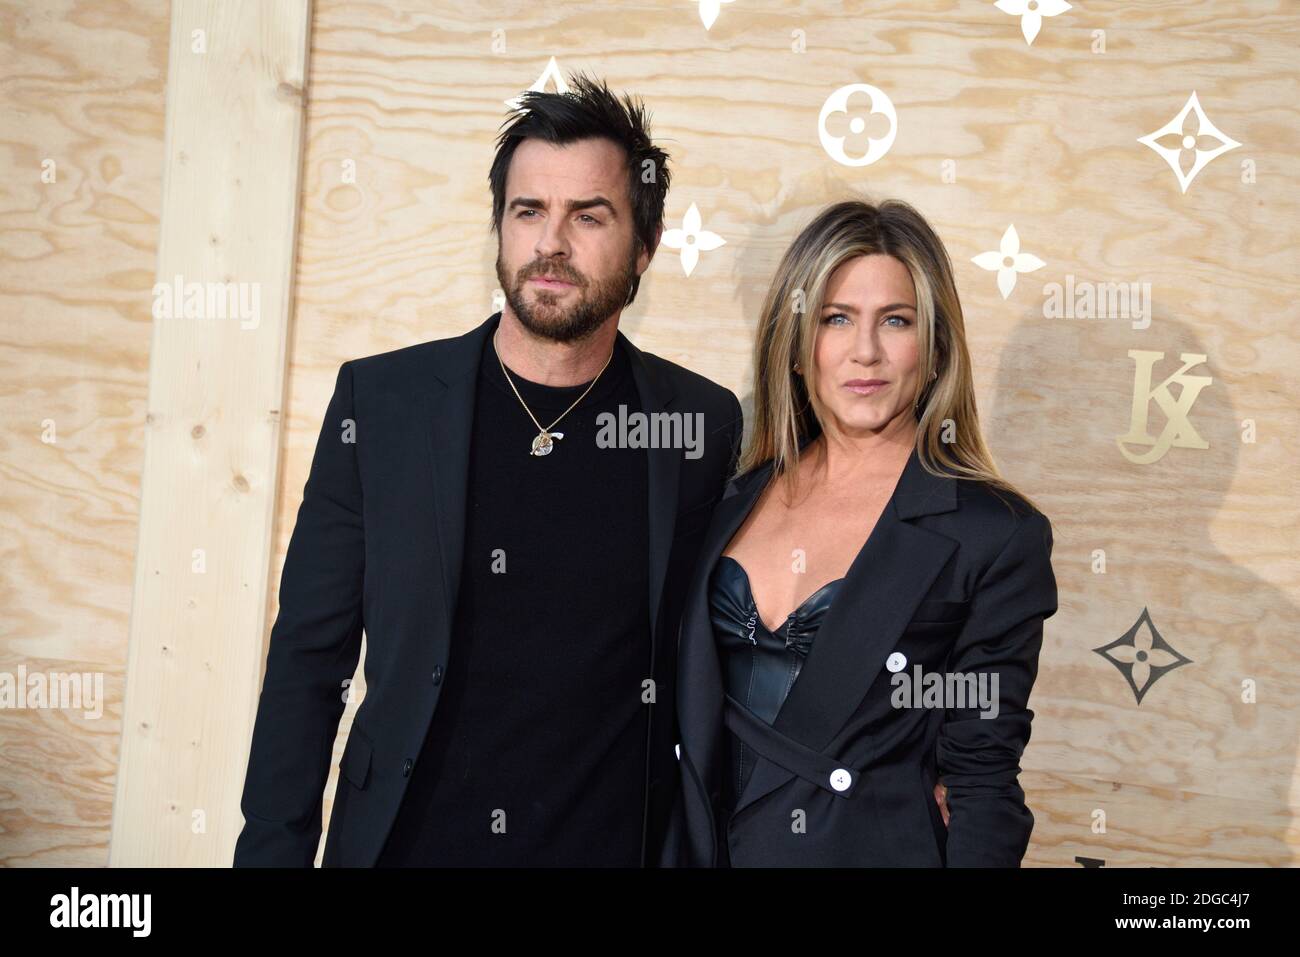 Justin Theroux and Jennifer Aniston attending the Louis Vuitton's Dinner for the Launch of Bags by Artist Jeff Koons at Musee du Louvre in Paris, France,on April 11, 2017. Photo by Alban Wyters/ABACAPRESS.COM Stock Photo